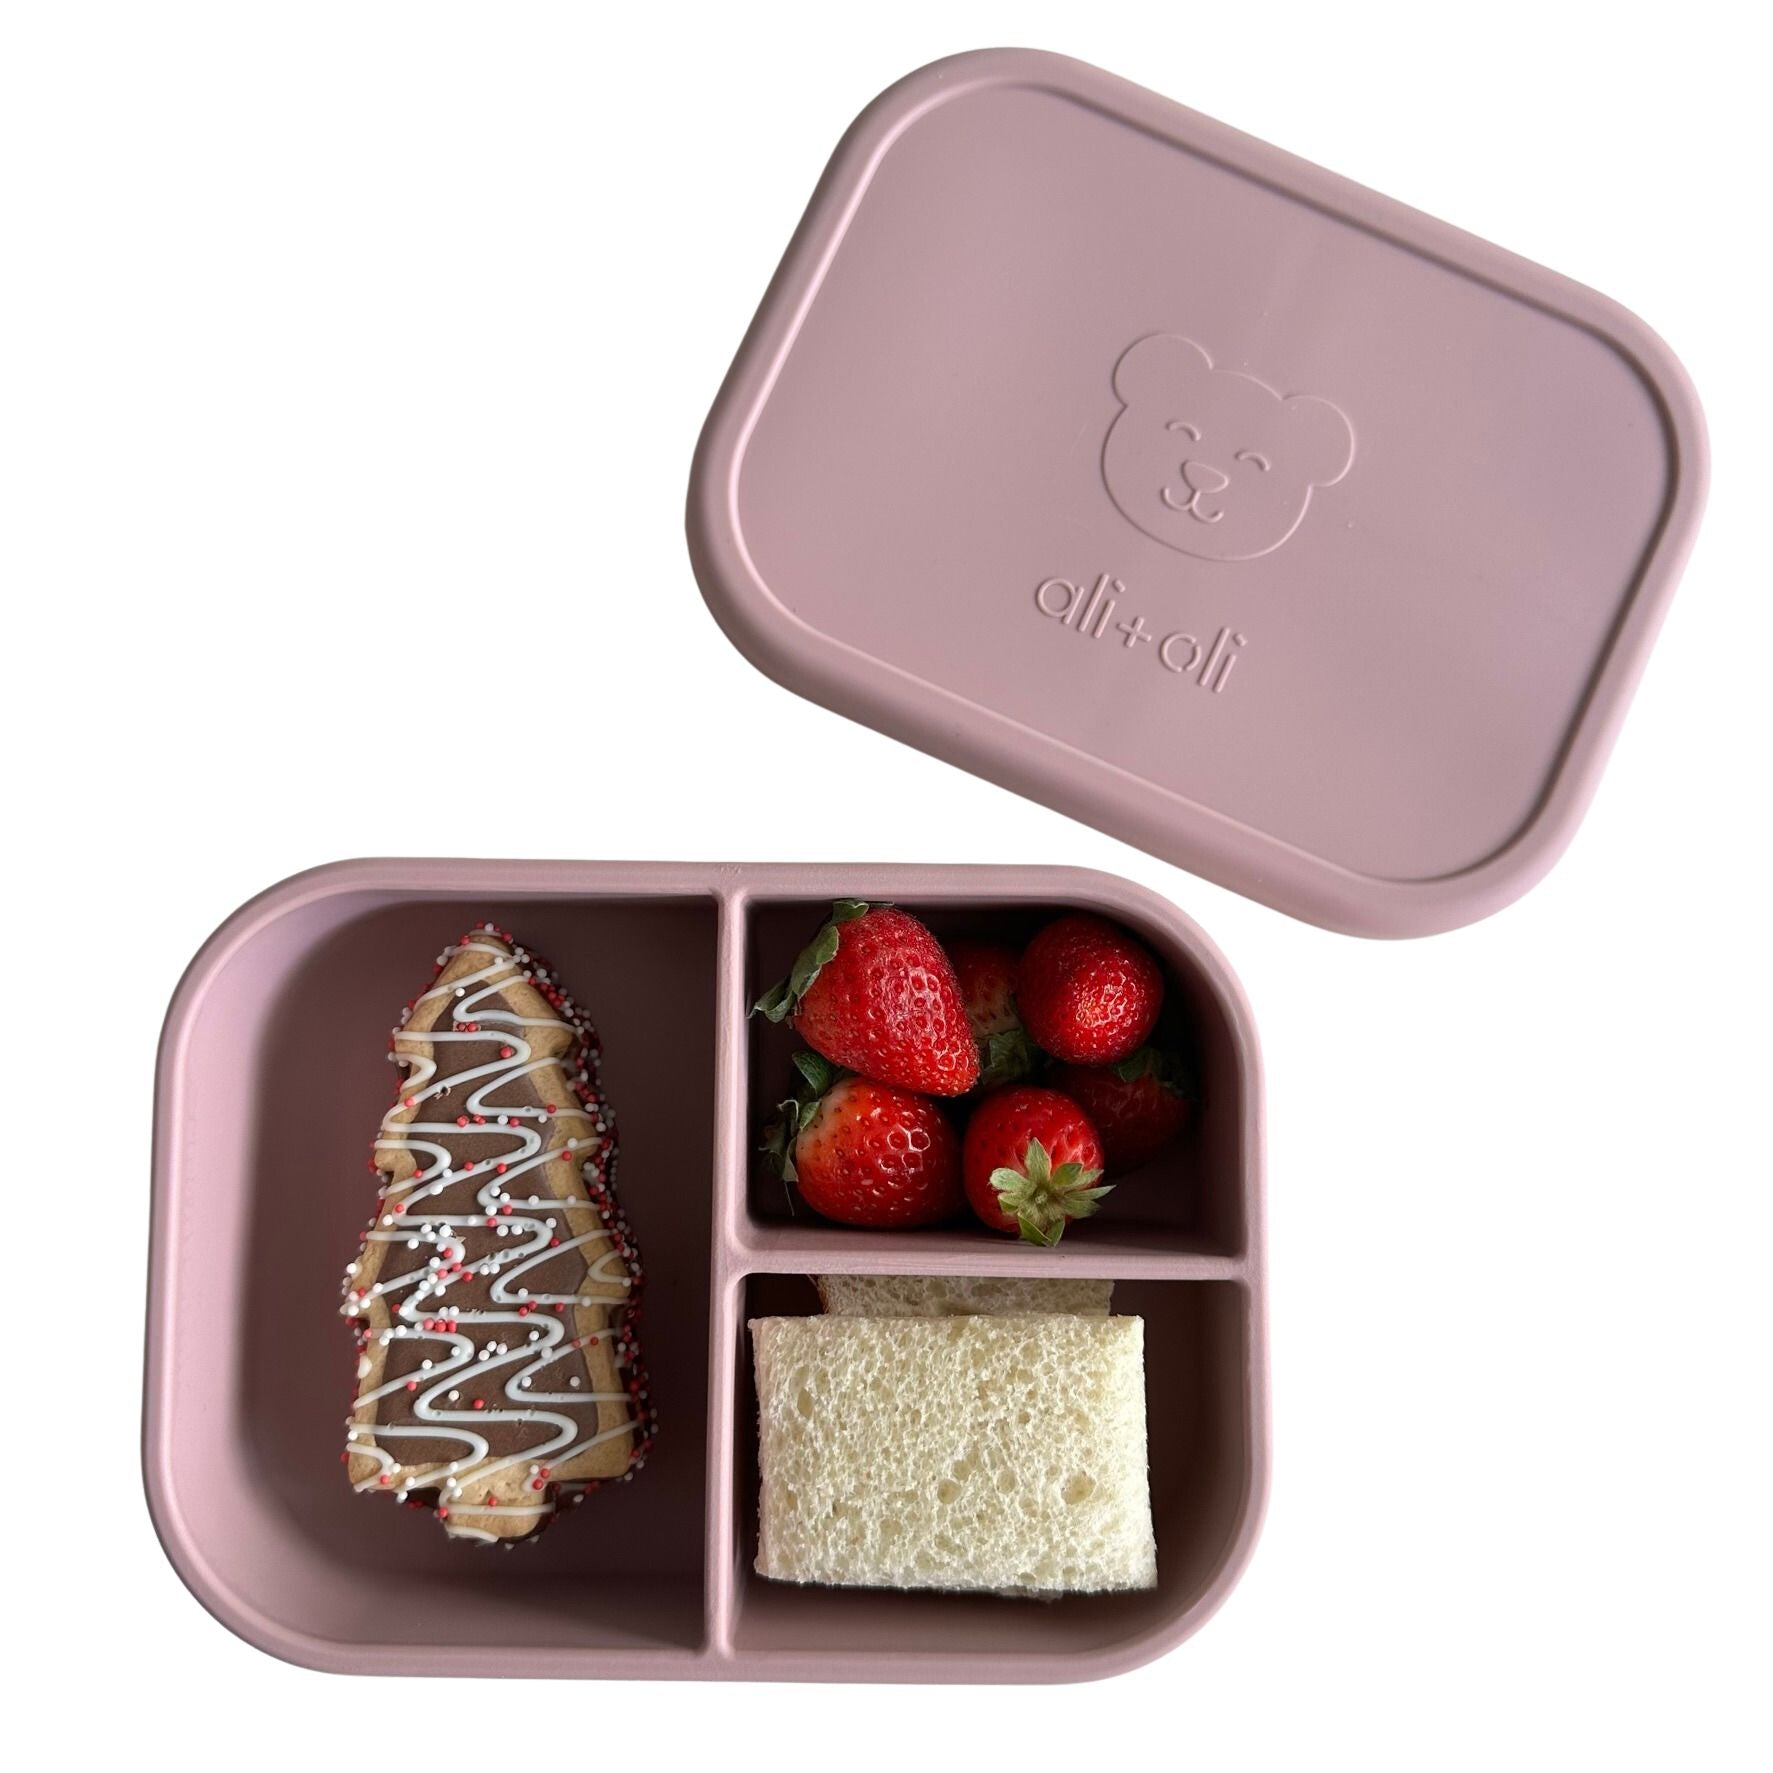 The bento box is eco-friendly and can be used again and again, reducing waste from disposable lunch containers.